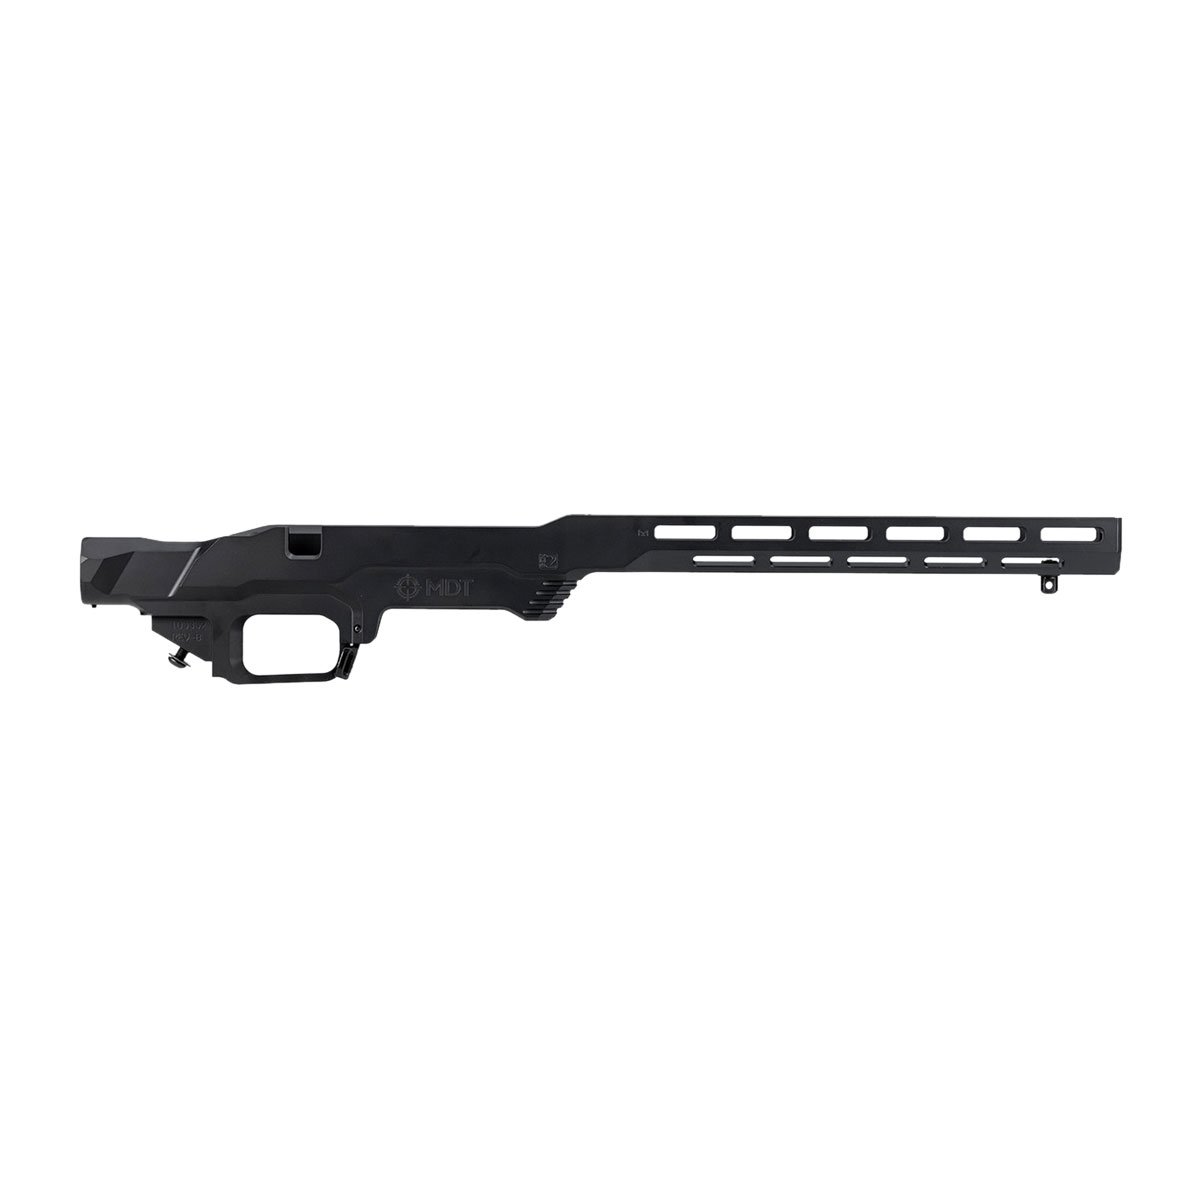 MDT - HOWA 1500 LSS-XL GEN 2 CHASSIS SYSTEM